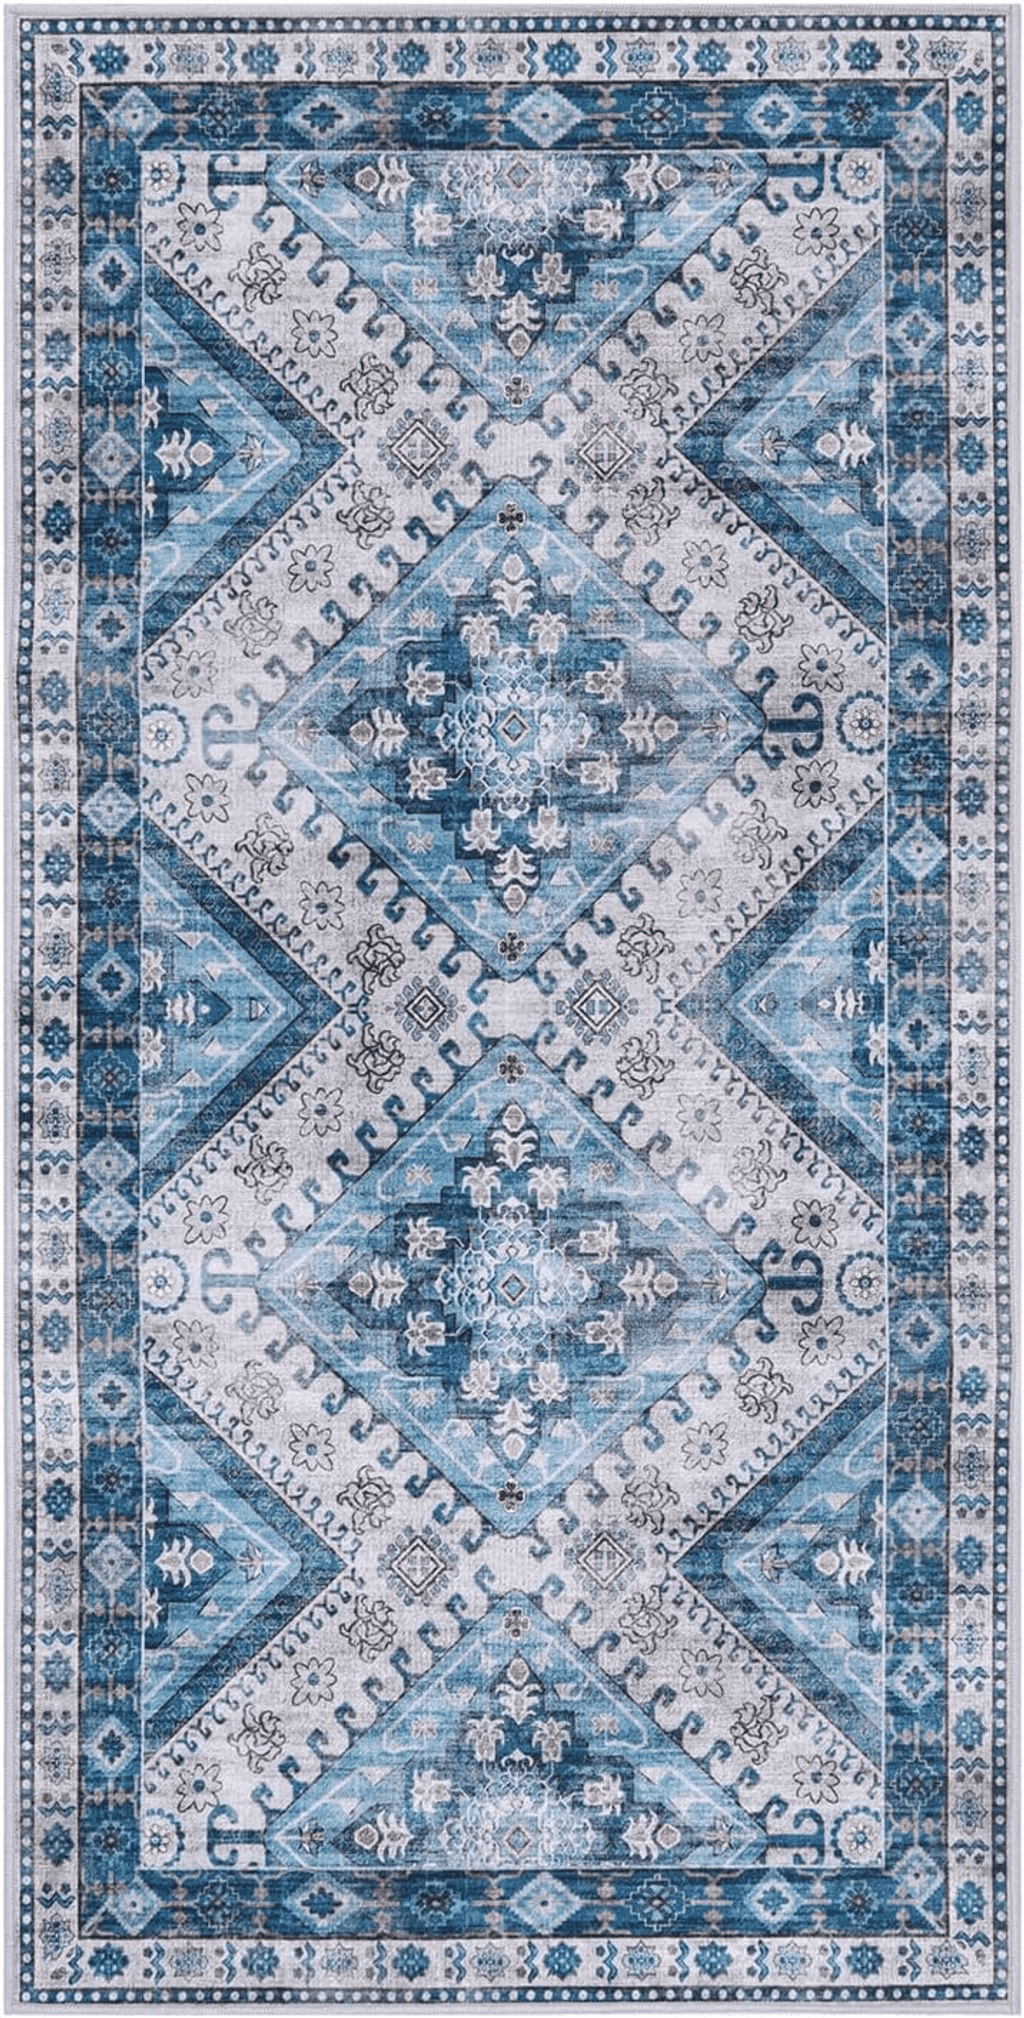 Antelope Beeiva Tribal Hallway Runner Rug, 2x4 Blue Kitchen Runner Rugs Non Skid Washable, Vintage Distressed Non-Shedding Laundry Room Rug Machine Washable Rug for Entryway Bedroom Kitchen